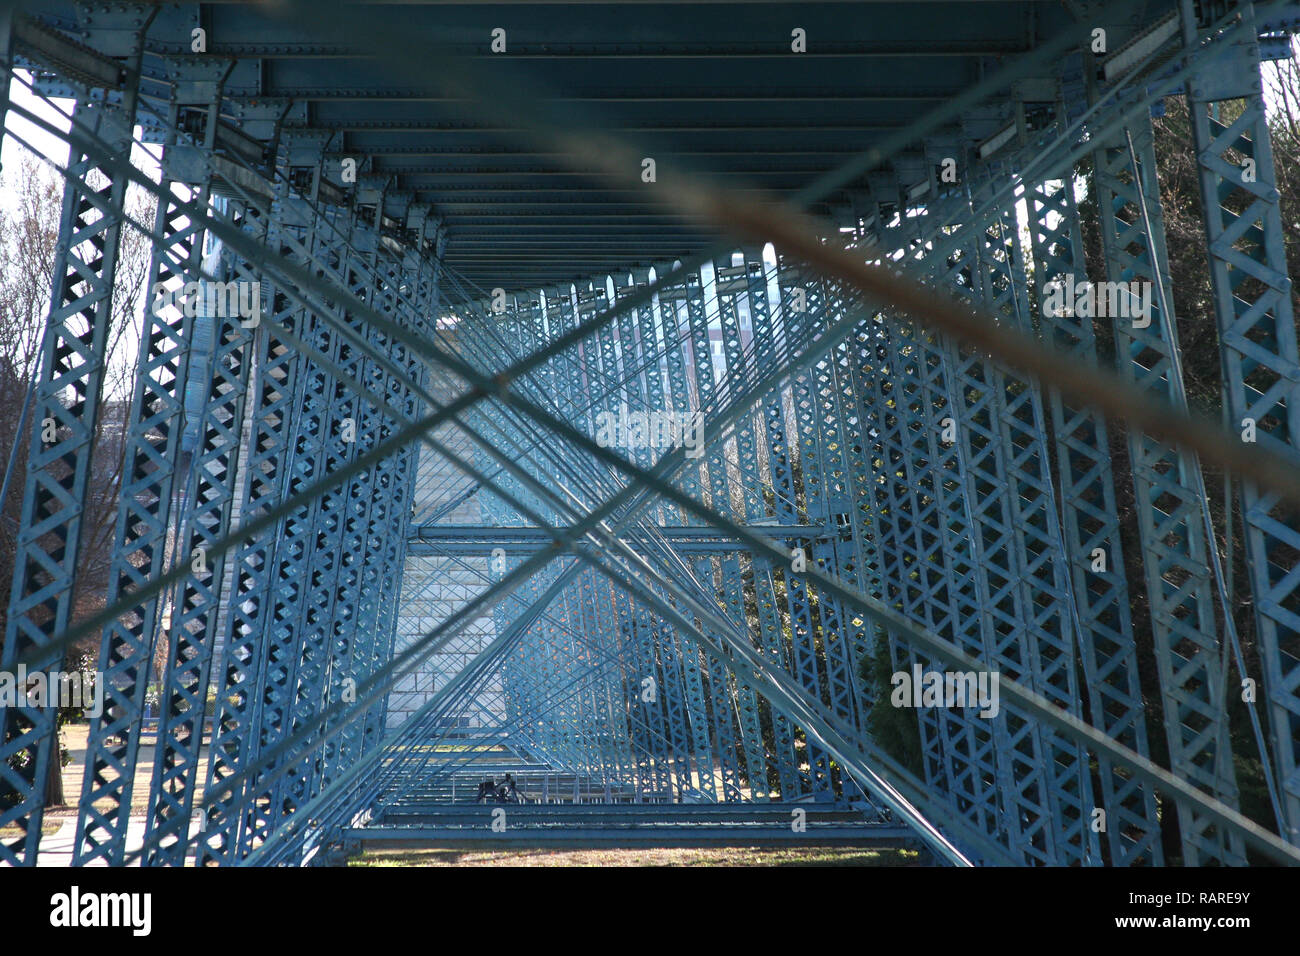 View under large metal bridge in Chattanooga, TN, USA Stock Photo